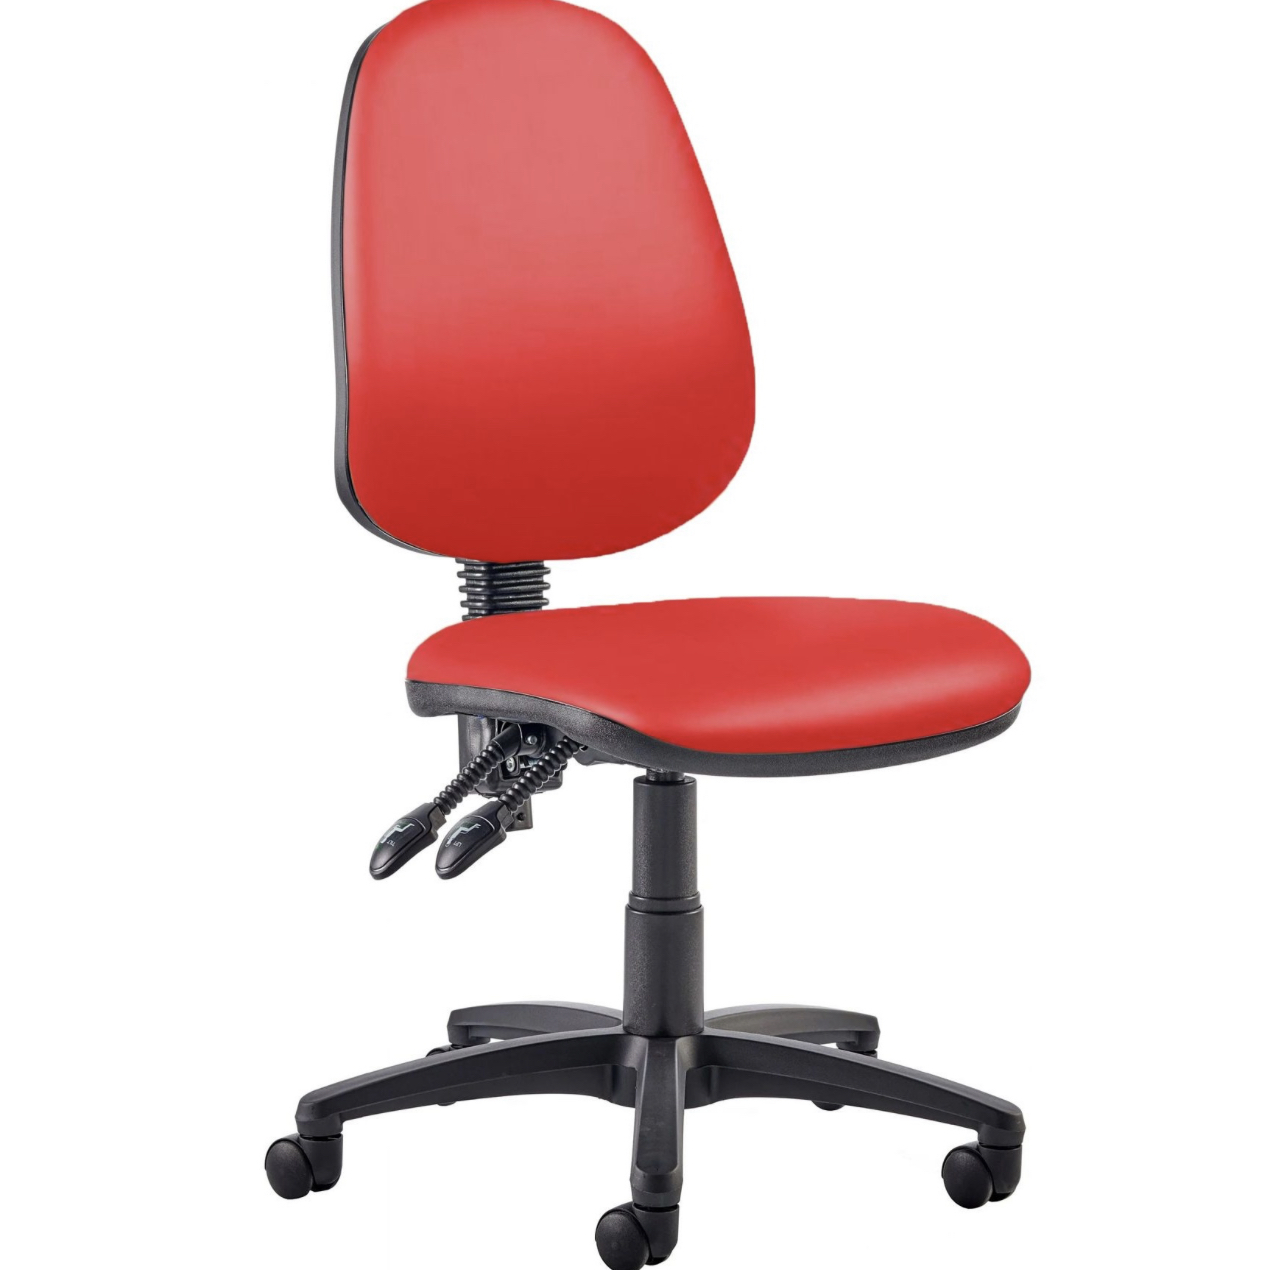 Kirby High back 2 lever vinyl operators chair red